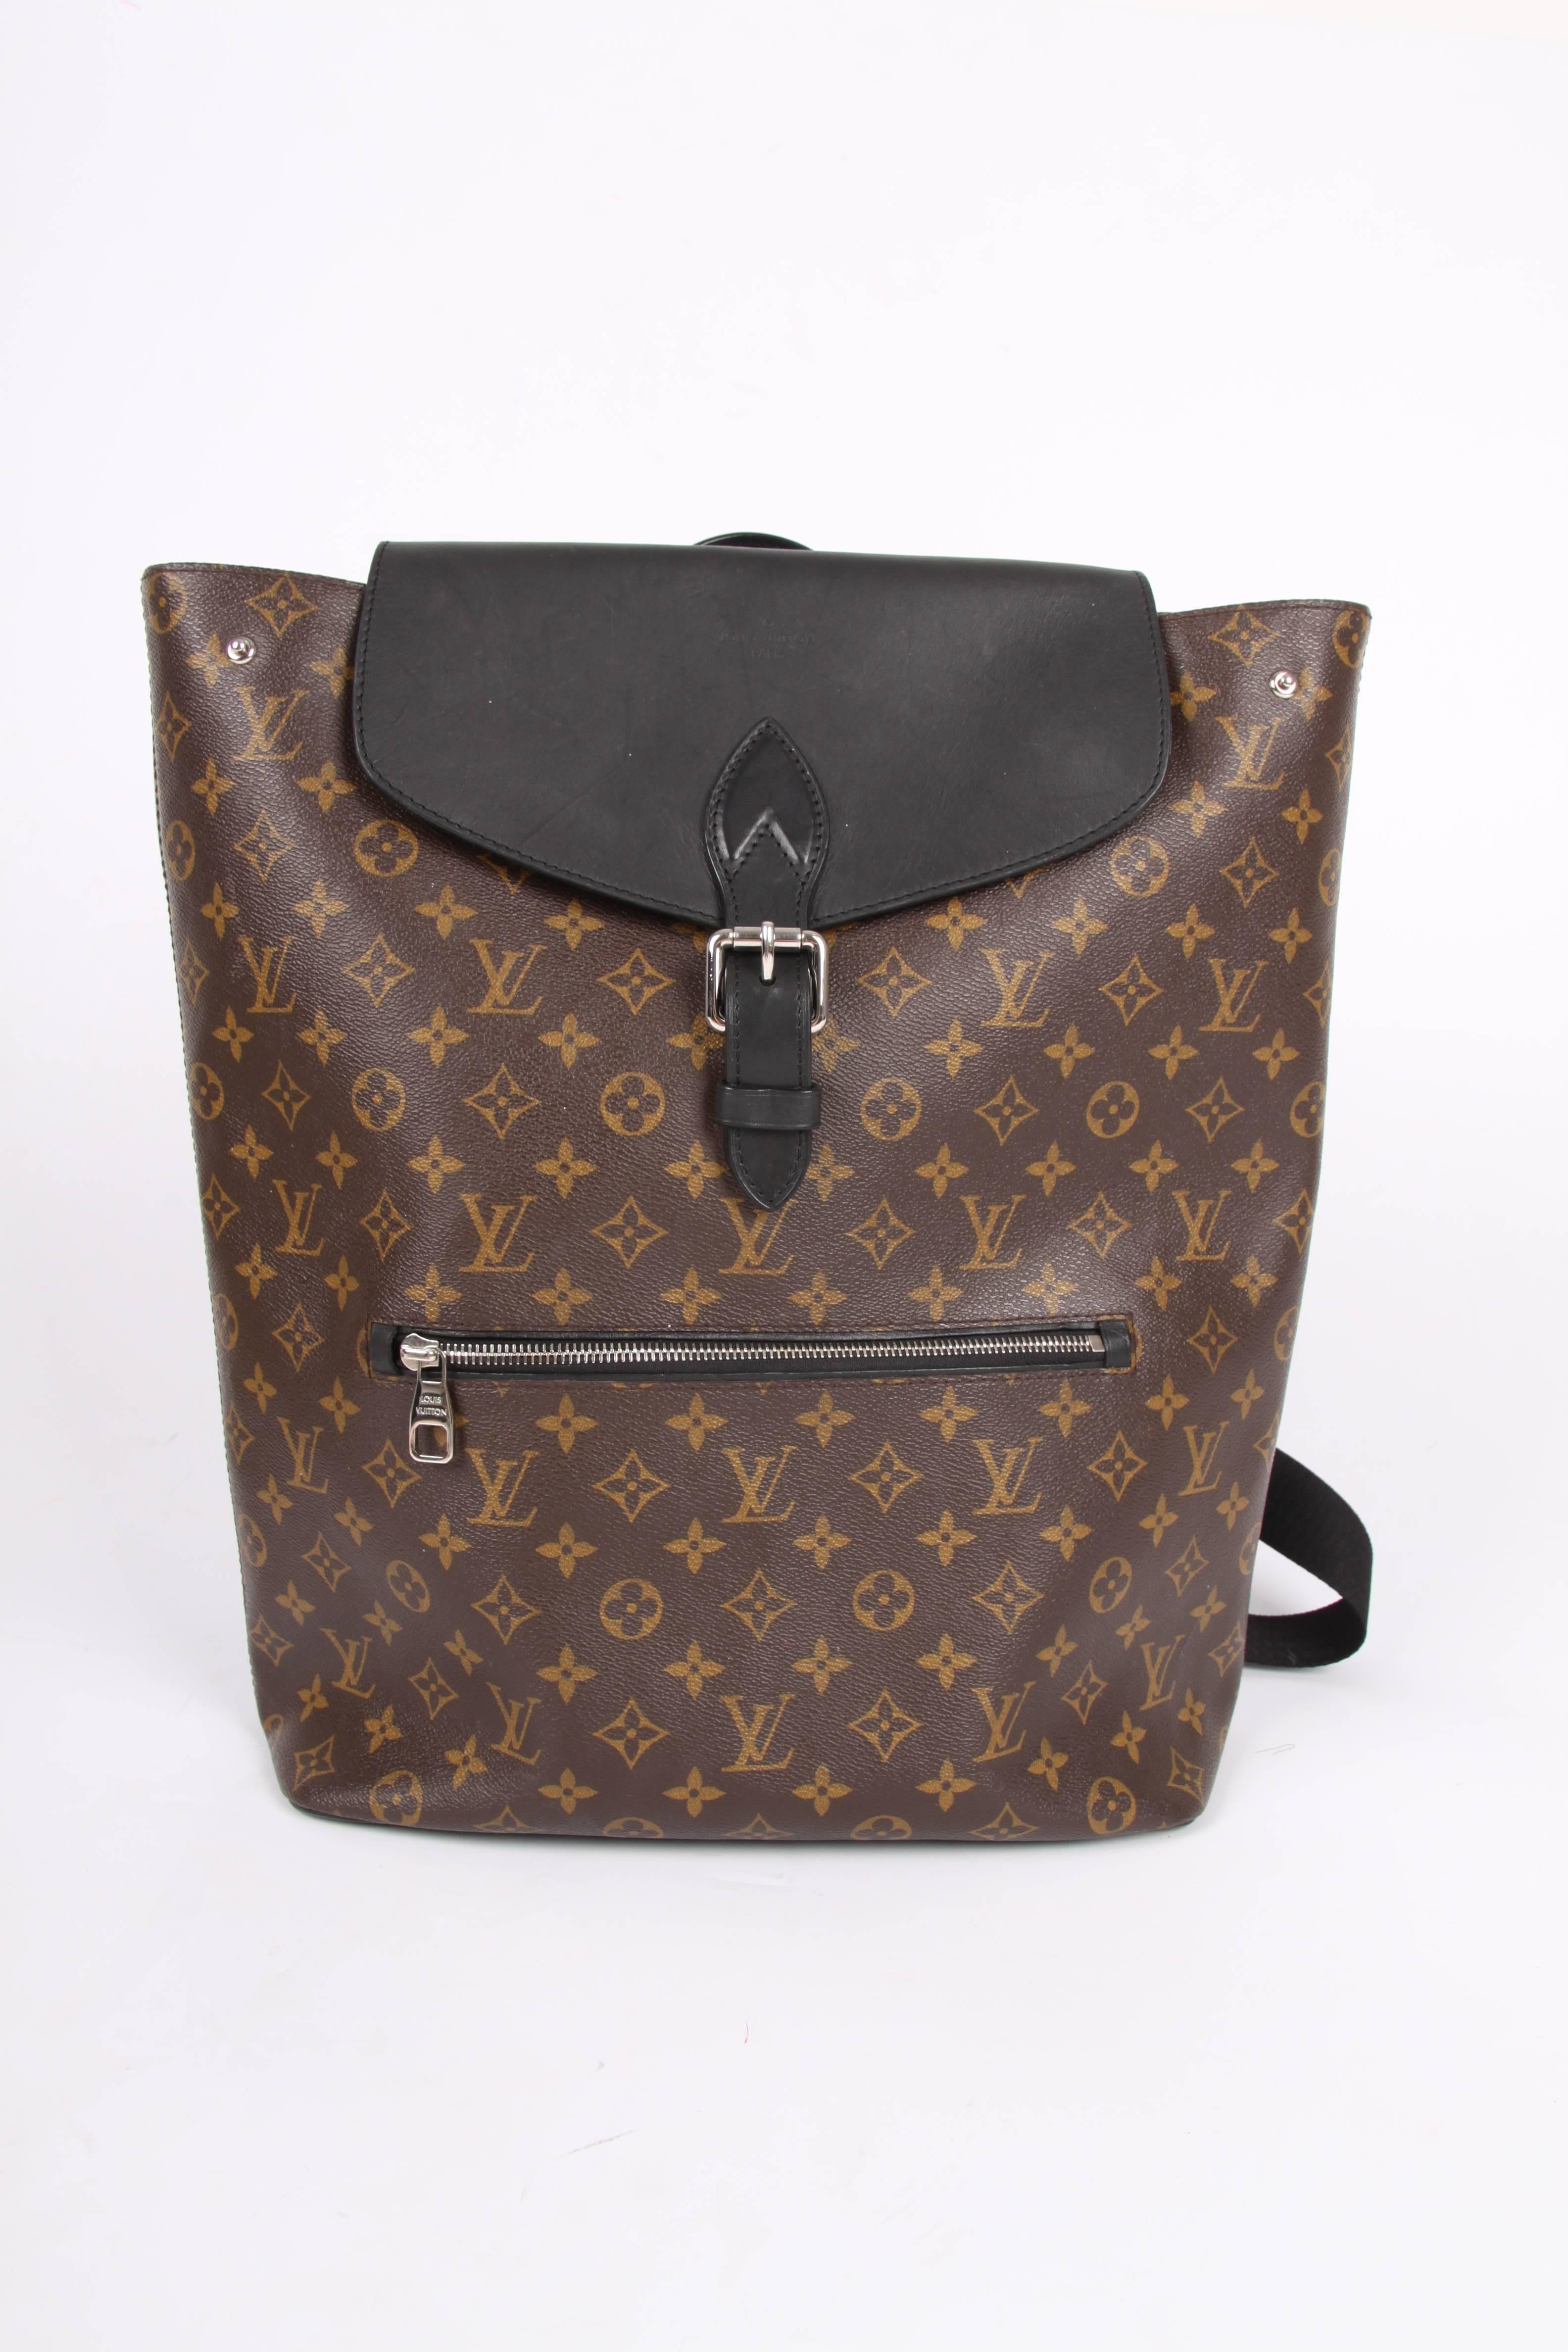 Large sized backpack with a modern shape; the Louis Vuitton Palk Backpack!

Of course crafted of dark brown canvas covered with LV monograms, the flap is made of black leather and decorated with silver-tone hardware. Black leather piping and softly